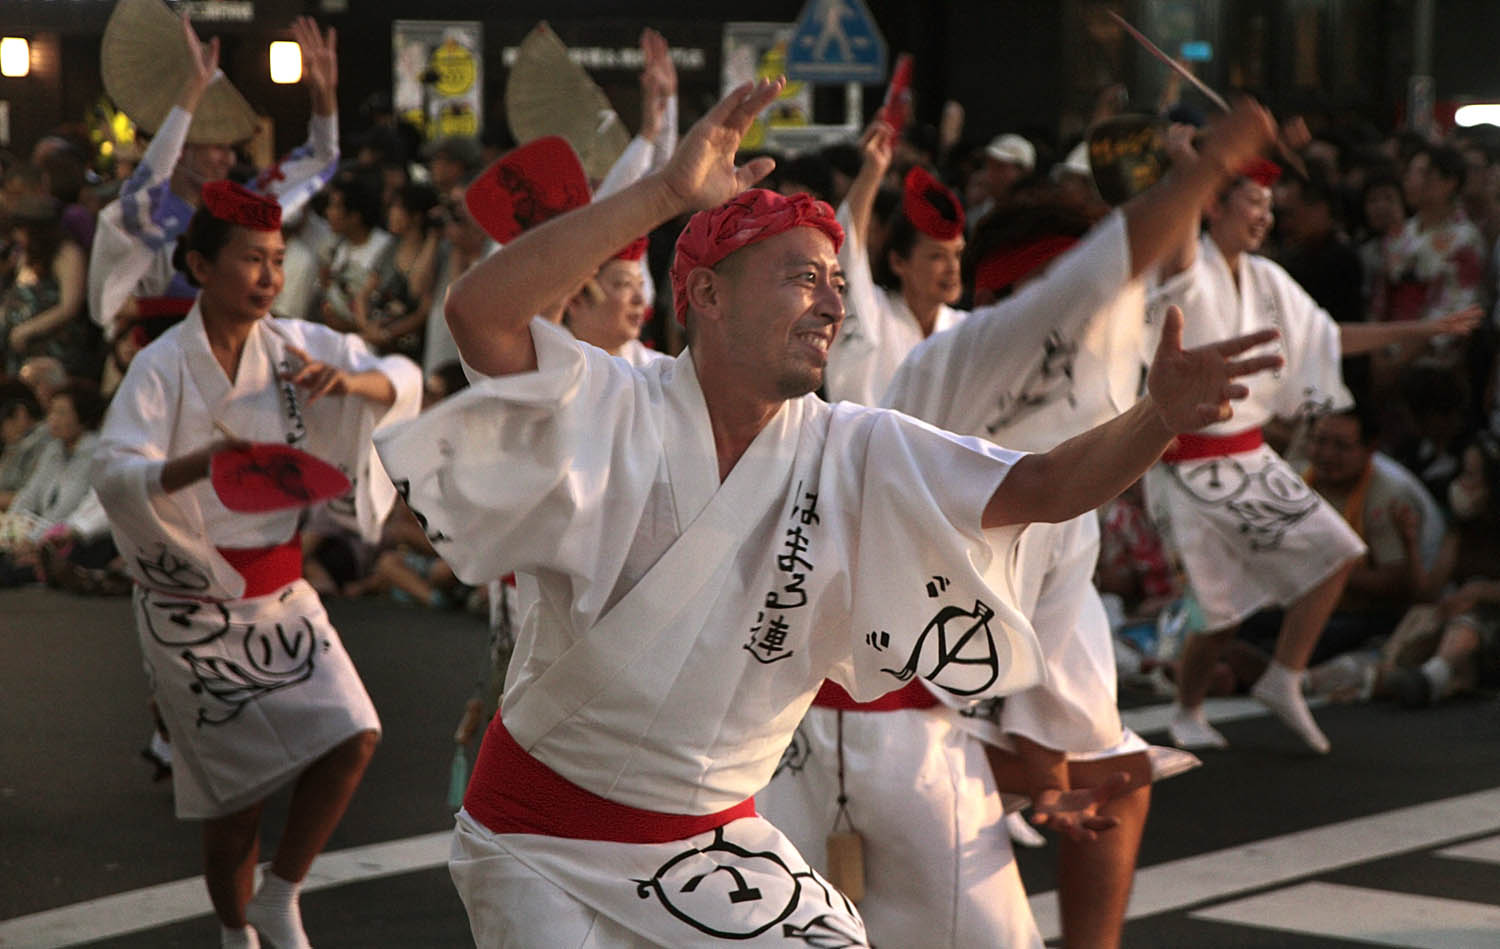  Dancers and musicians perform at the Awa Odori festival in Koenji in Tokyo. The dance festival is part of the summer Obon celebrations in Japan in which Japanese honor the spirits of their ancestors. 